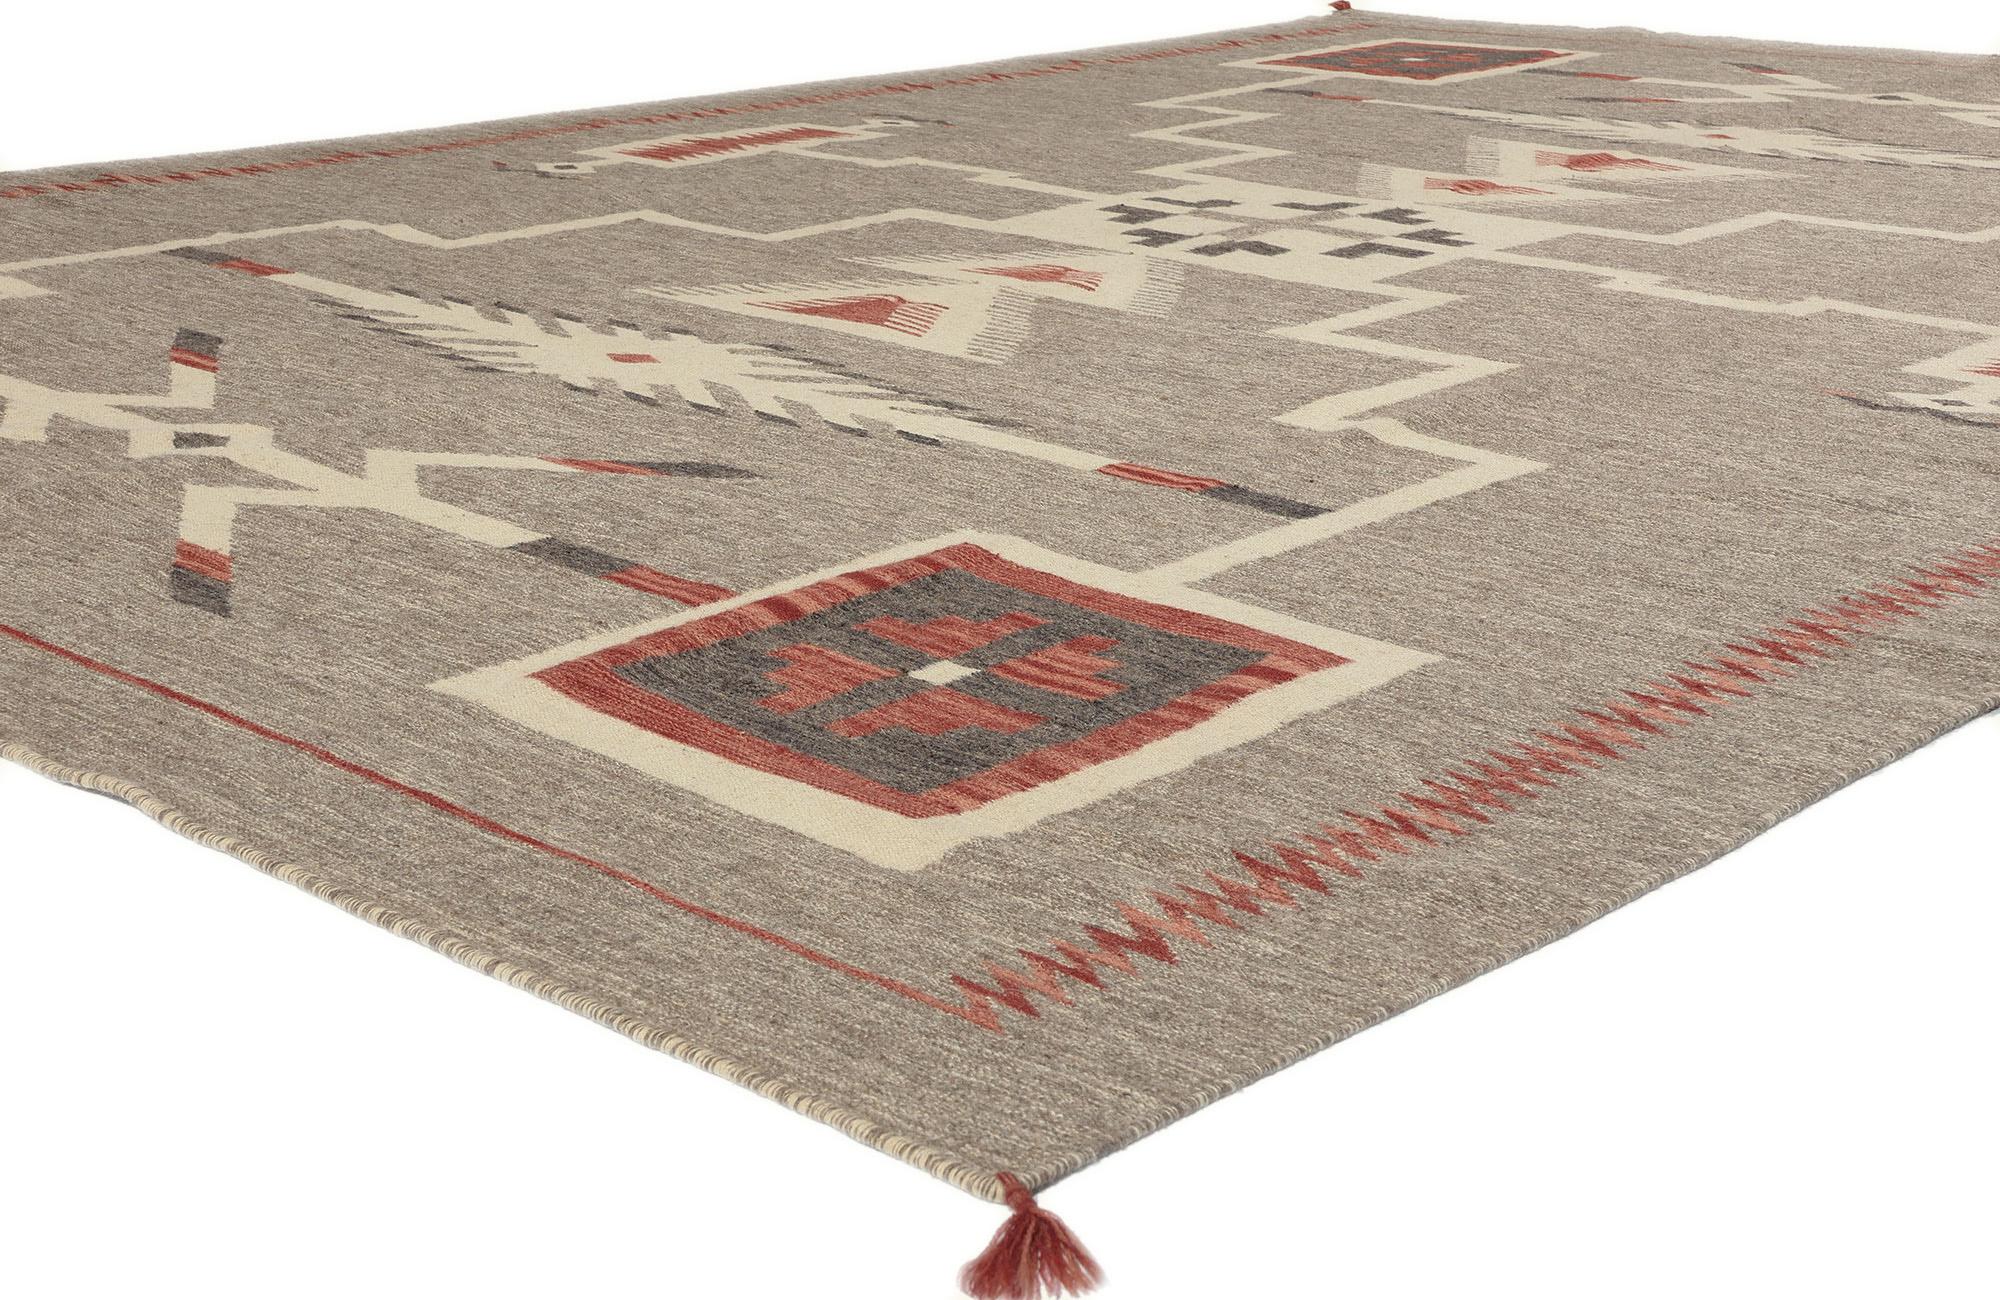 81027 Southwestern Navajo-Style Rug with Storm Pattern, 08'10 x 12'03. In the captivating realm of Santa Fe design aesthetics, immerse yourself in the enchanting fusion of Southwest and Modern style within this meticulously handwoven Navajo-inspired